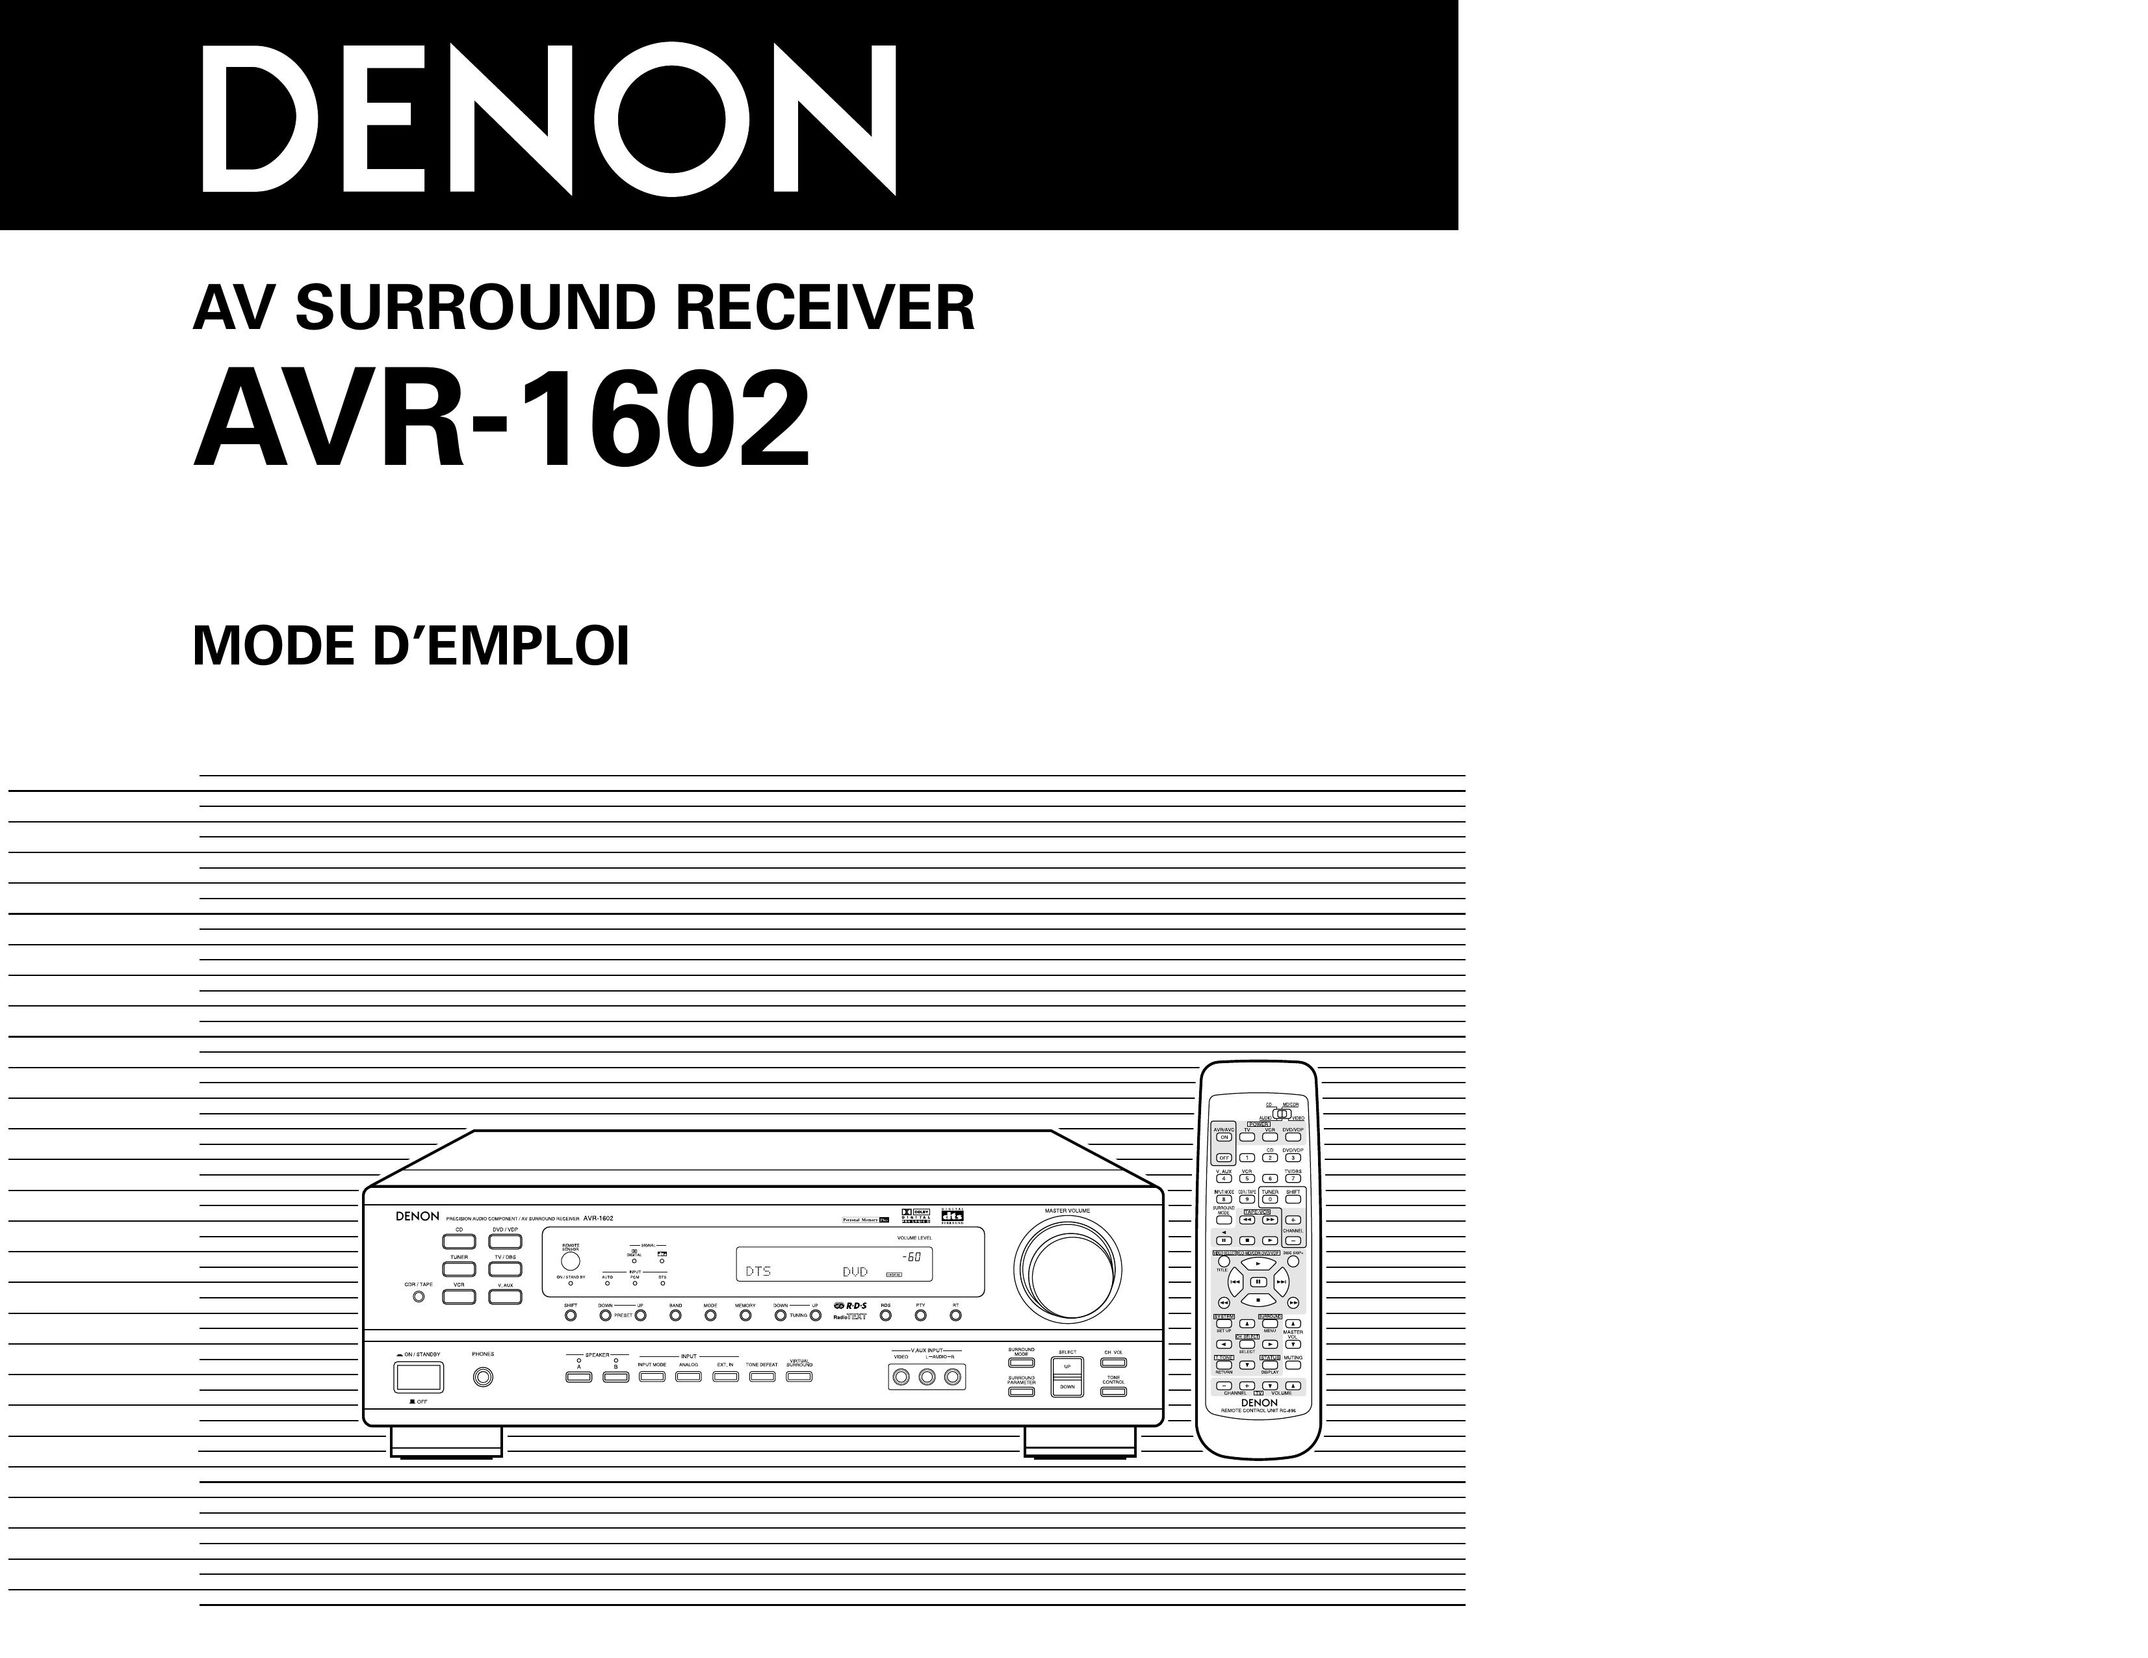 Denon AVR-1602 Home Theater System User Manual